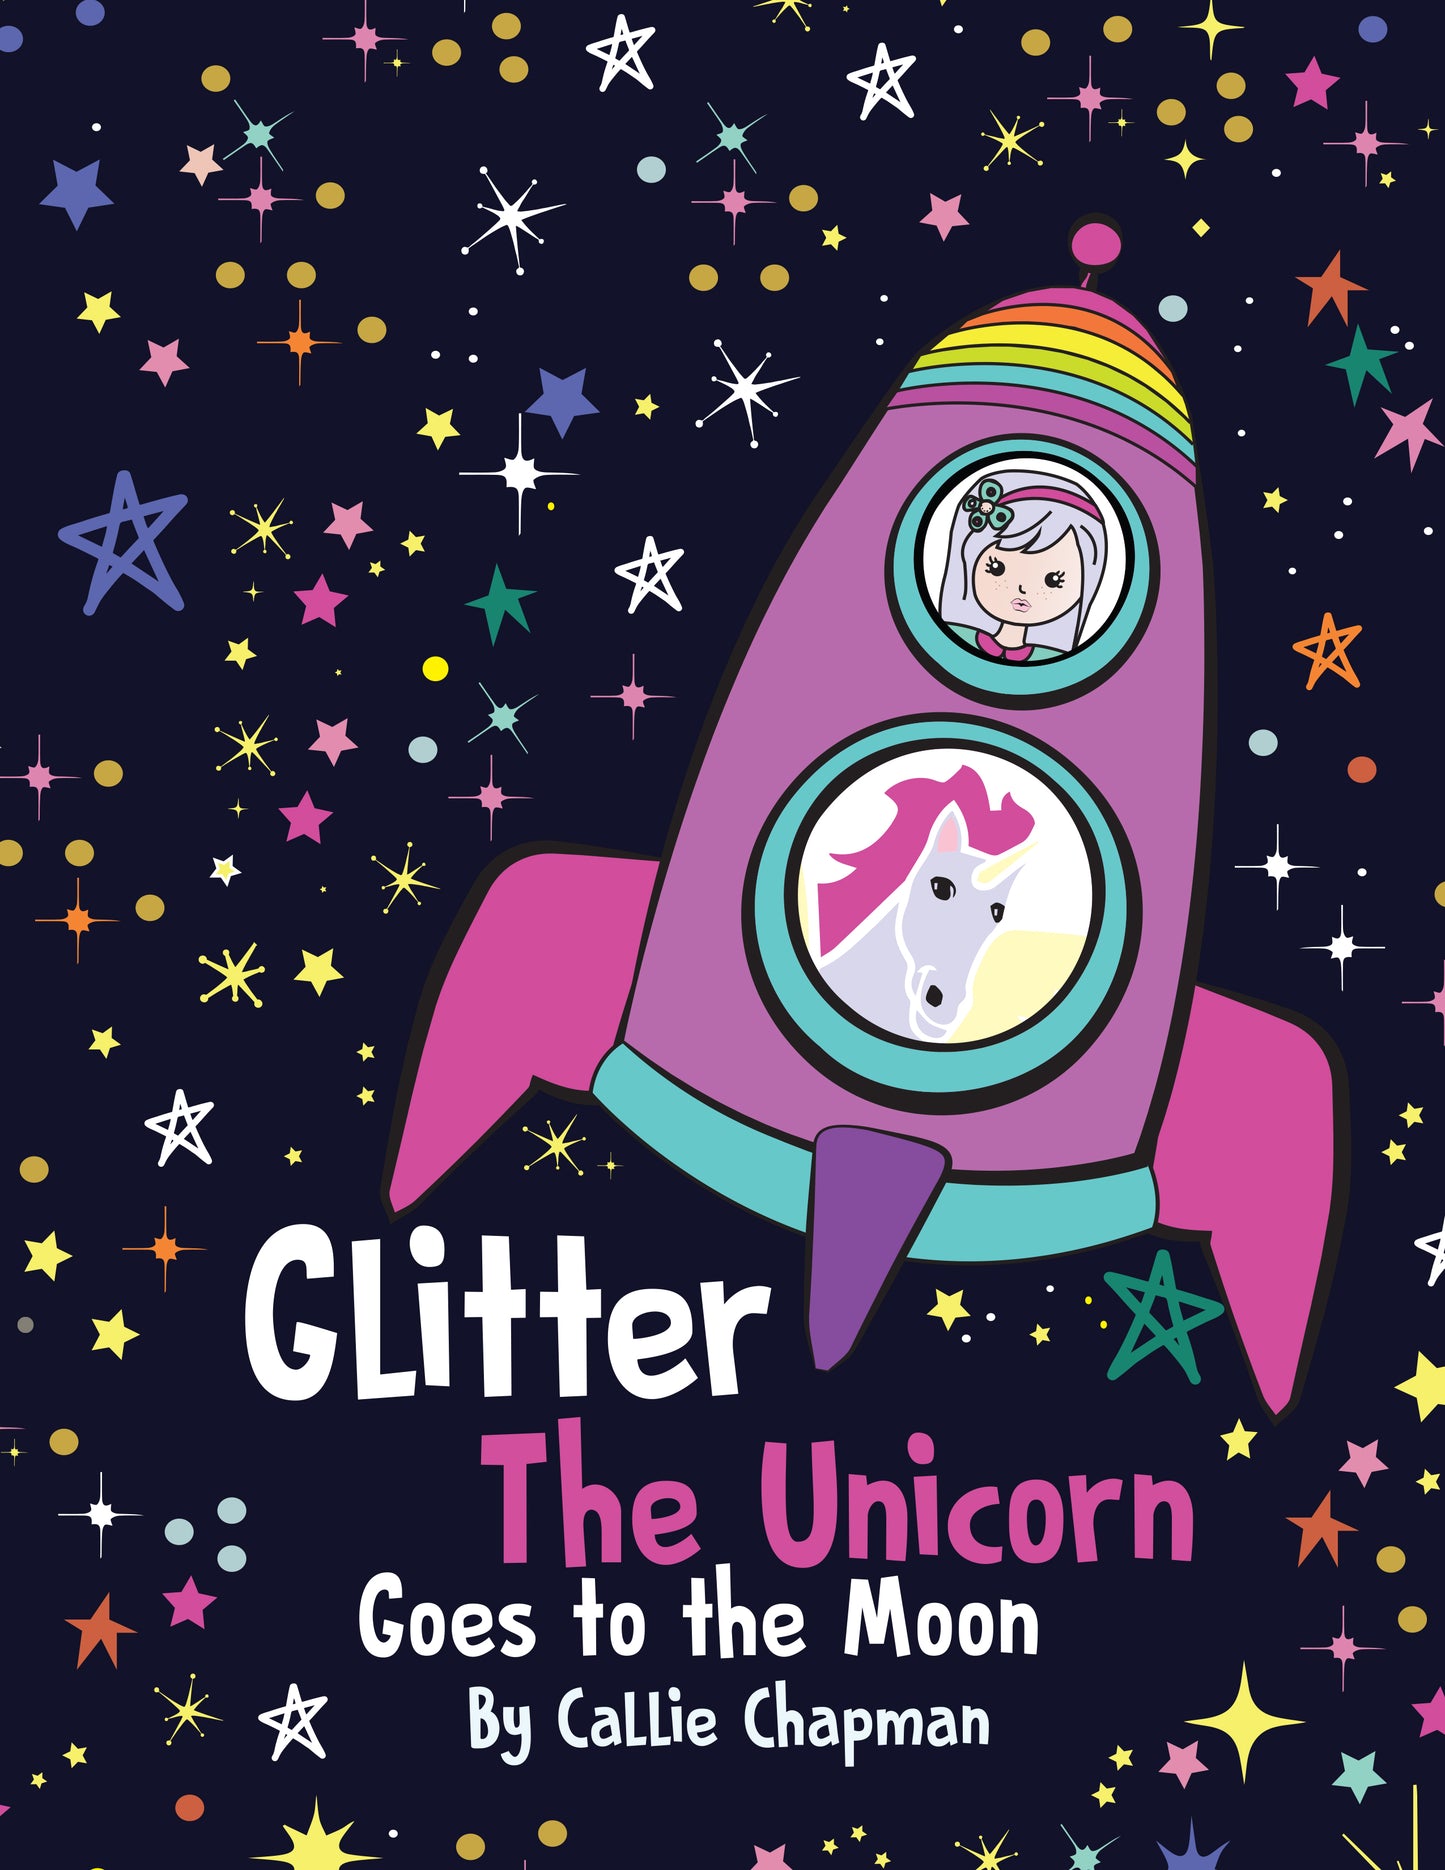 Glitter the Unicorn goes to the Moon